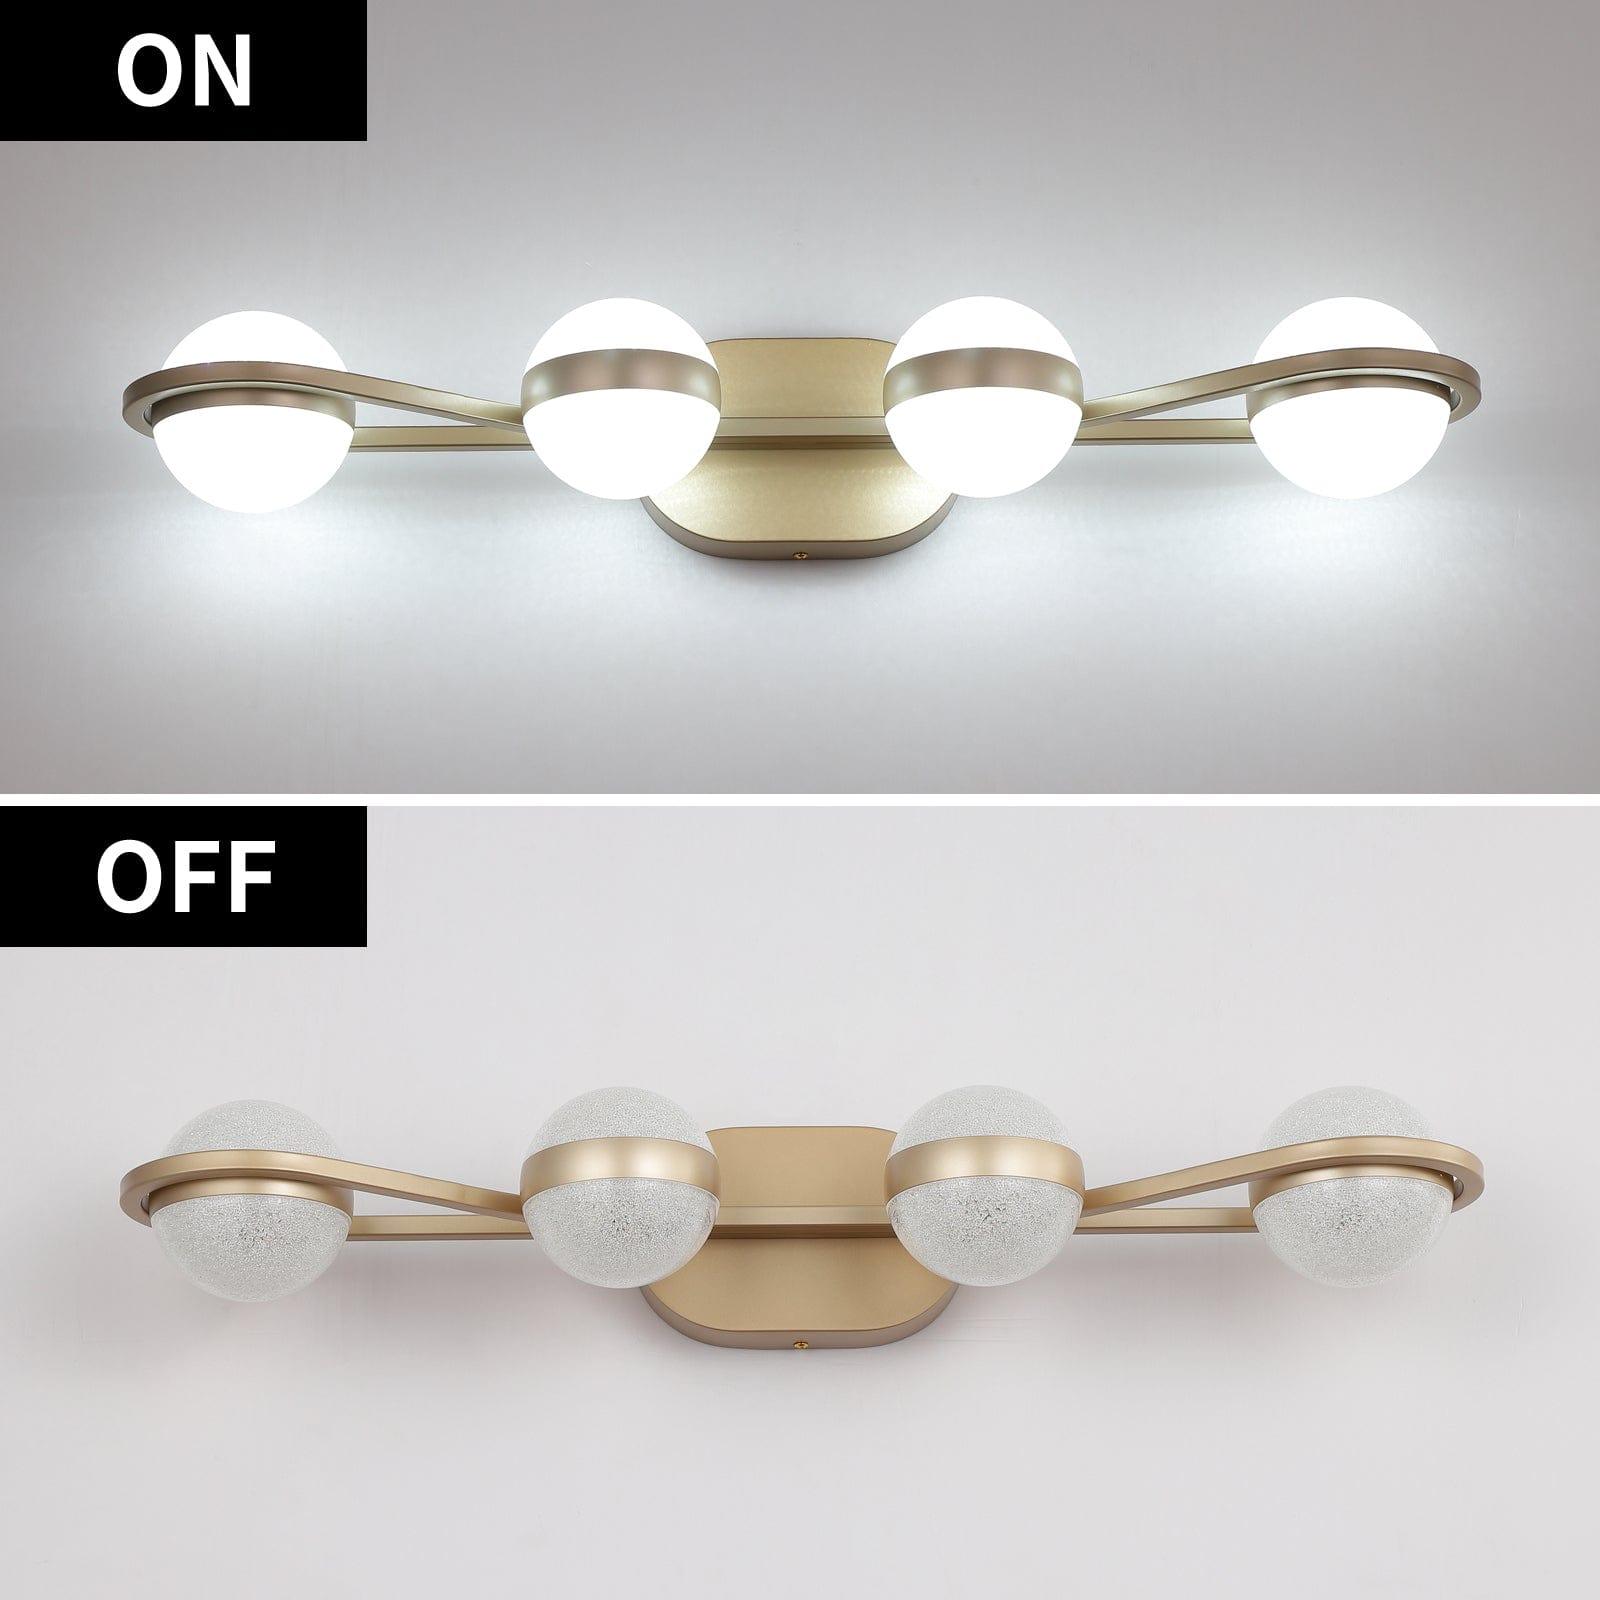 Shop Diocletian Vanity Lights Mademoiselle Home Decor